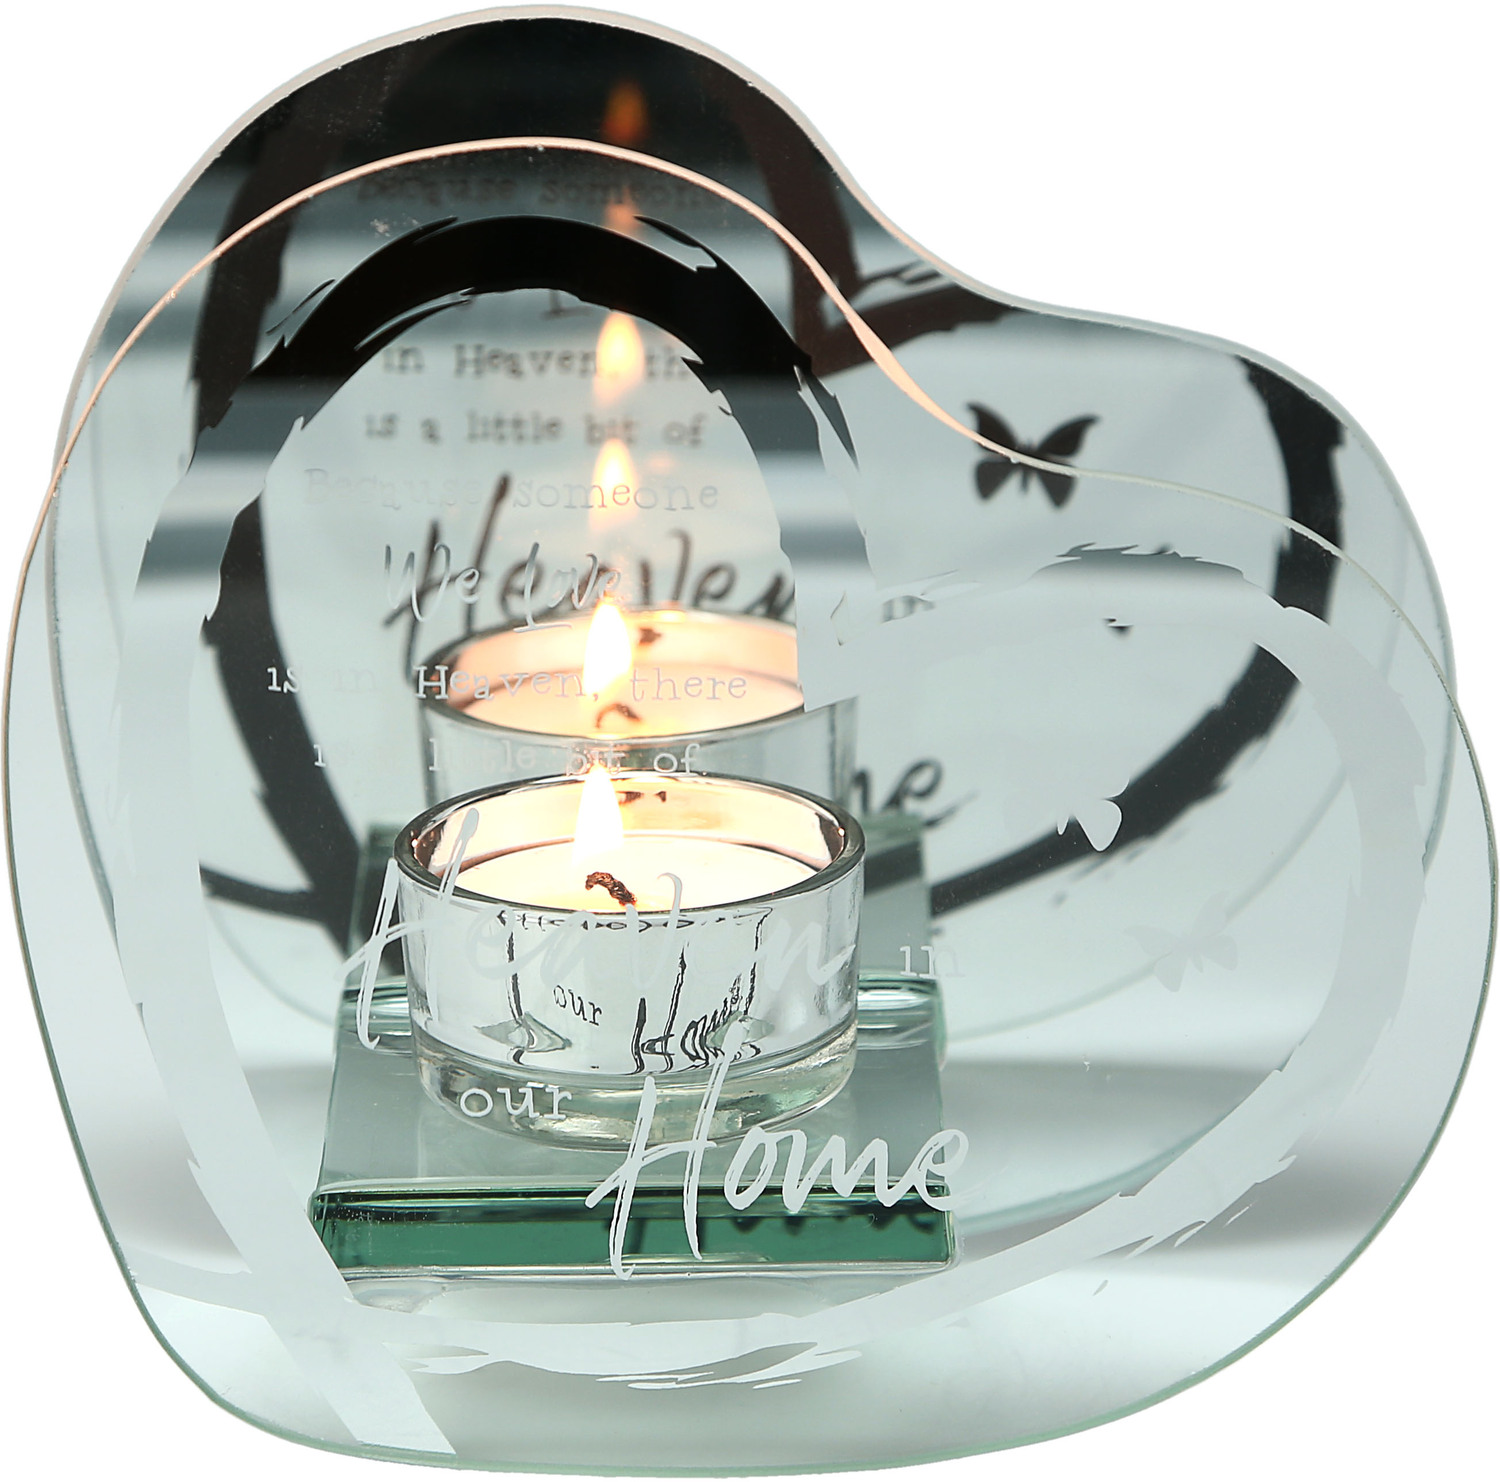 Heaven in our Home by Forever in our Hearts - Heaven in our Home - 5.5" x 5.25" Mirrored Glass Candle Holder